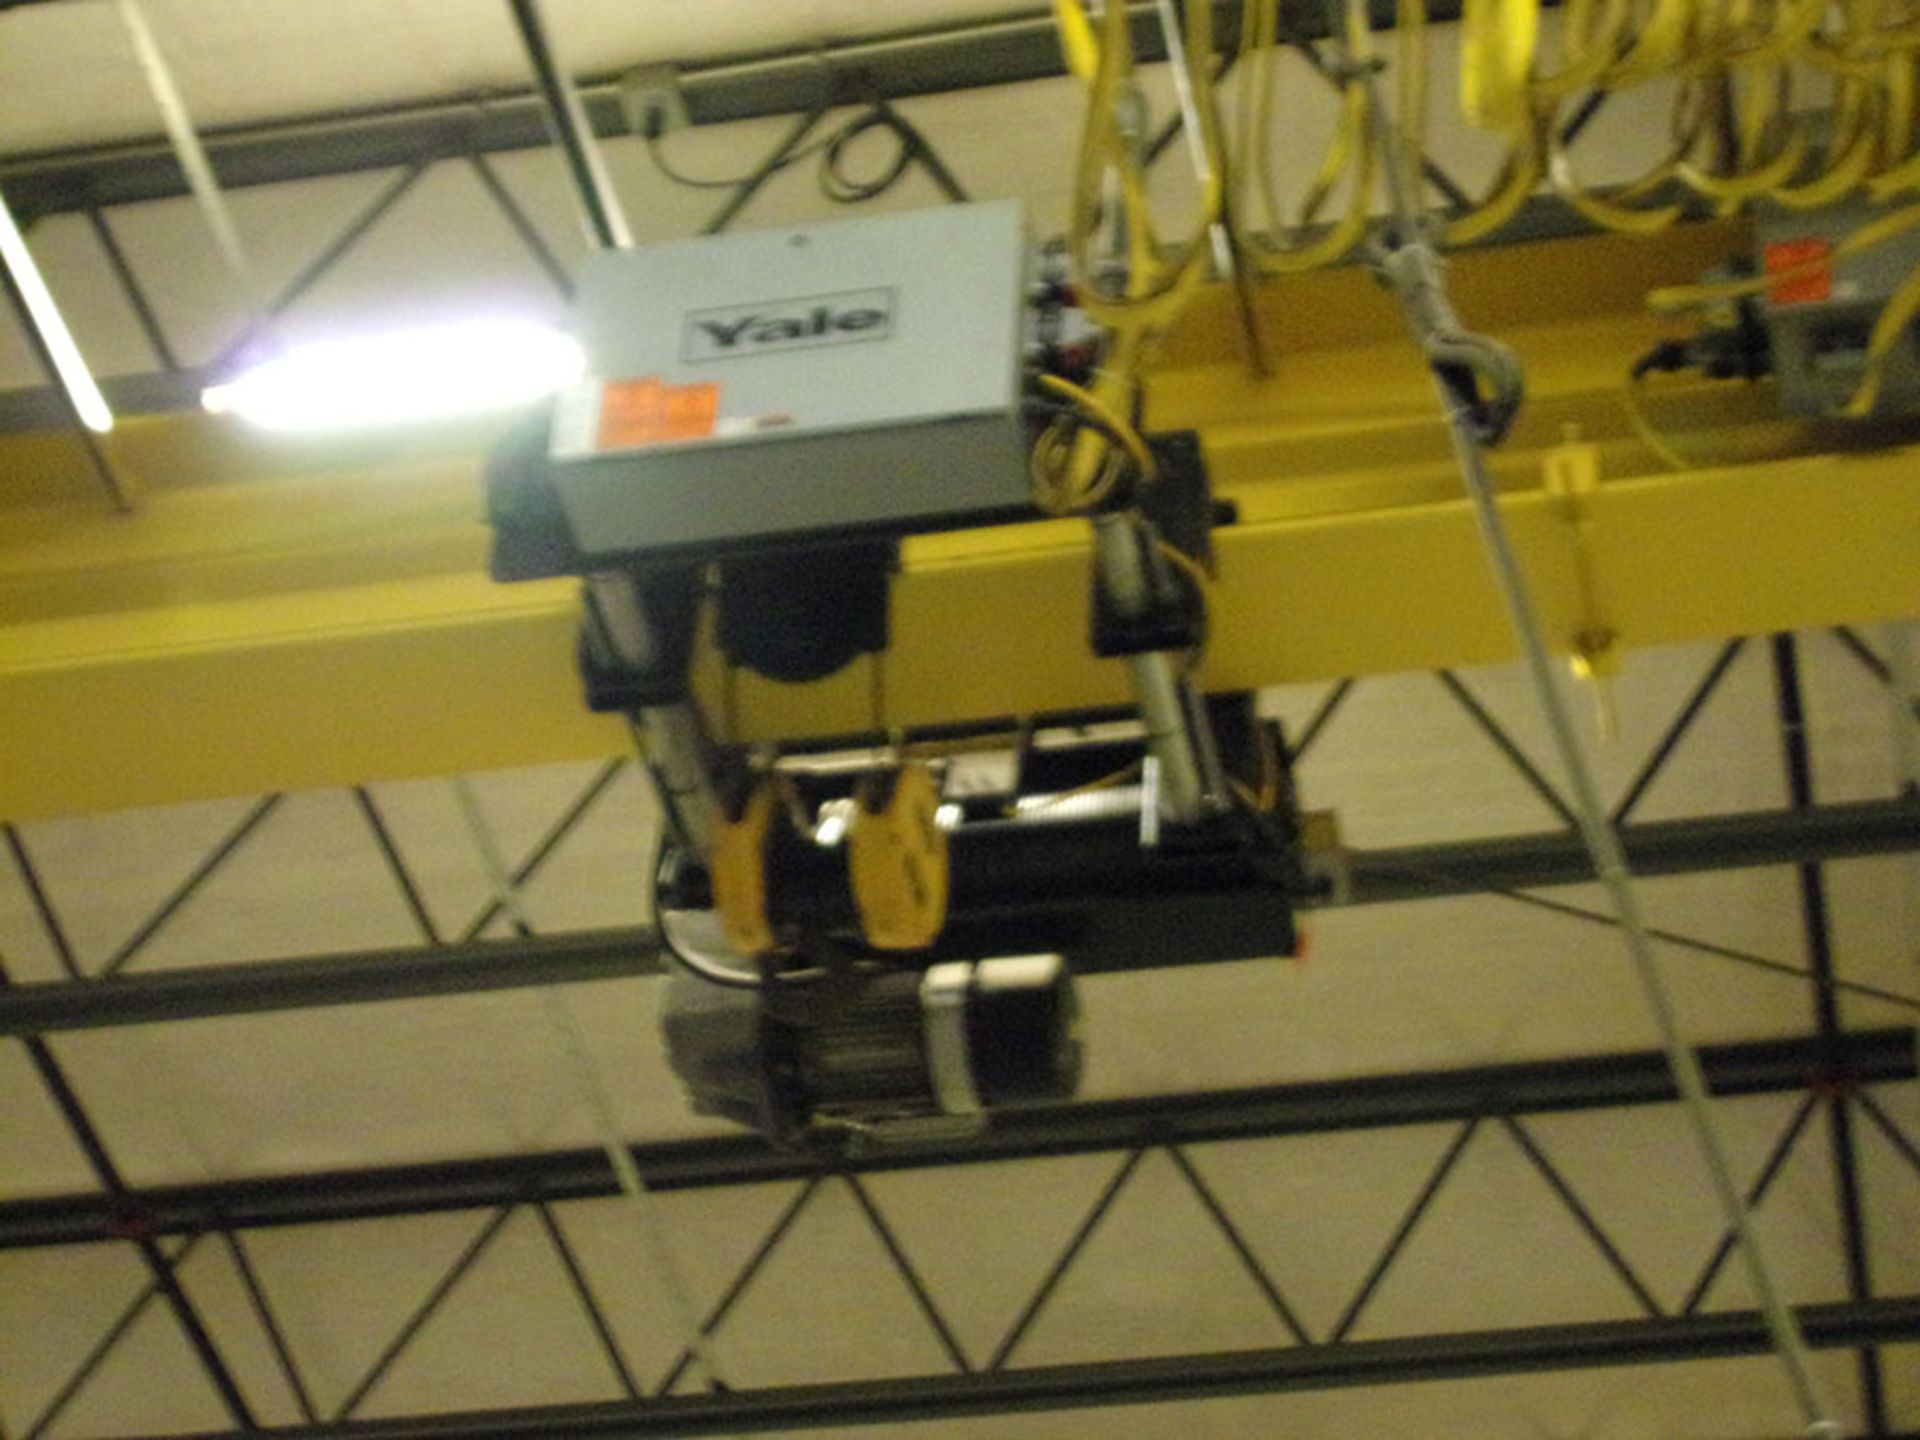 YALE 5-TON TOP RUNNING CRANE (J1) WITH PENDANT CONTROL